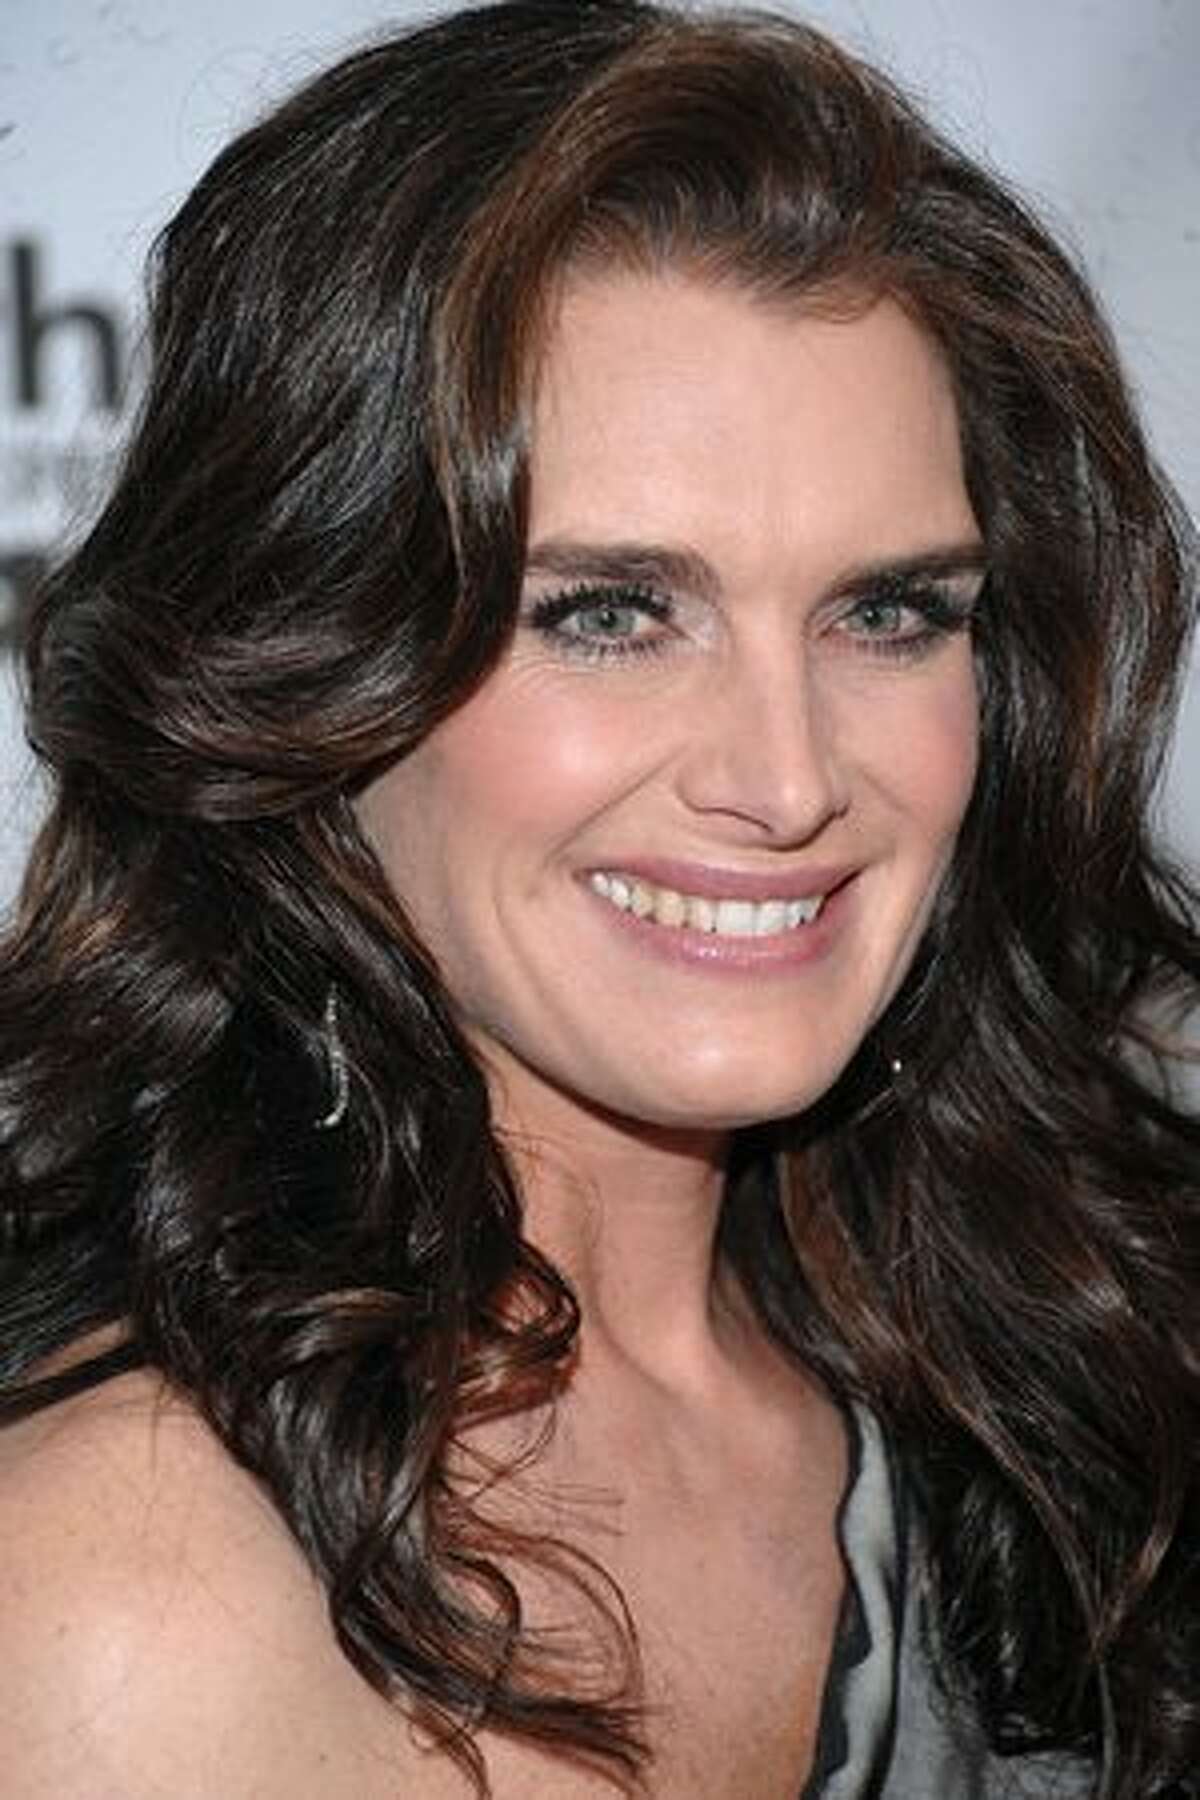 Actress Brooke Shields attends IFP's 19th Annual Gotham Independent Film Awards at Cipriani, Wall Street on November 30, 2009 in New York City.